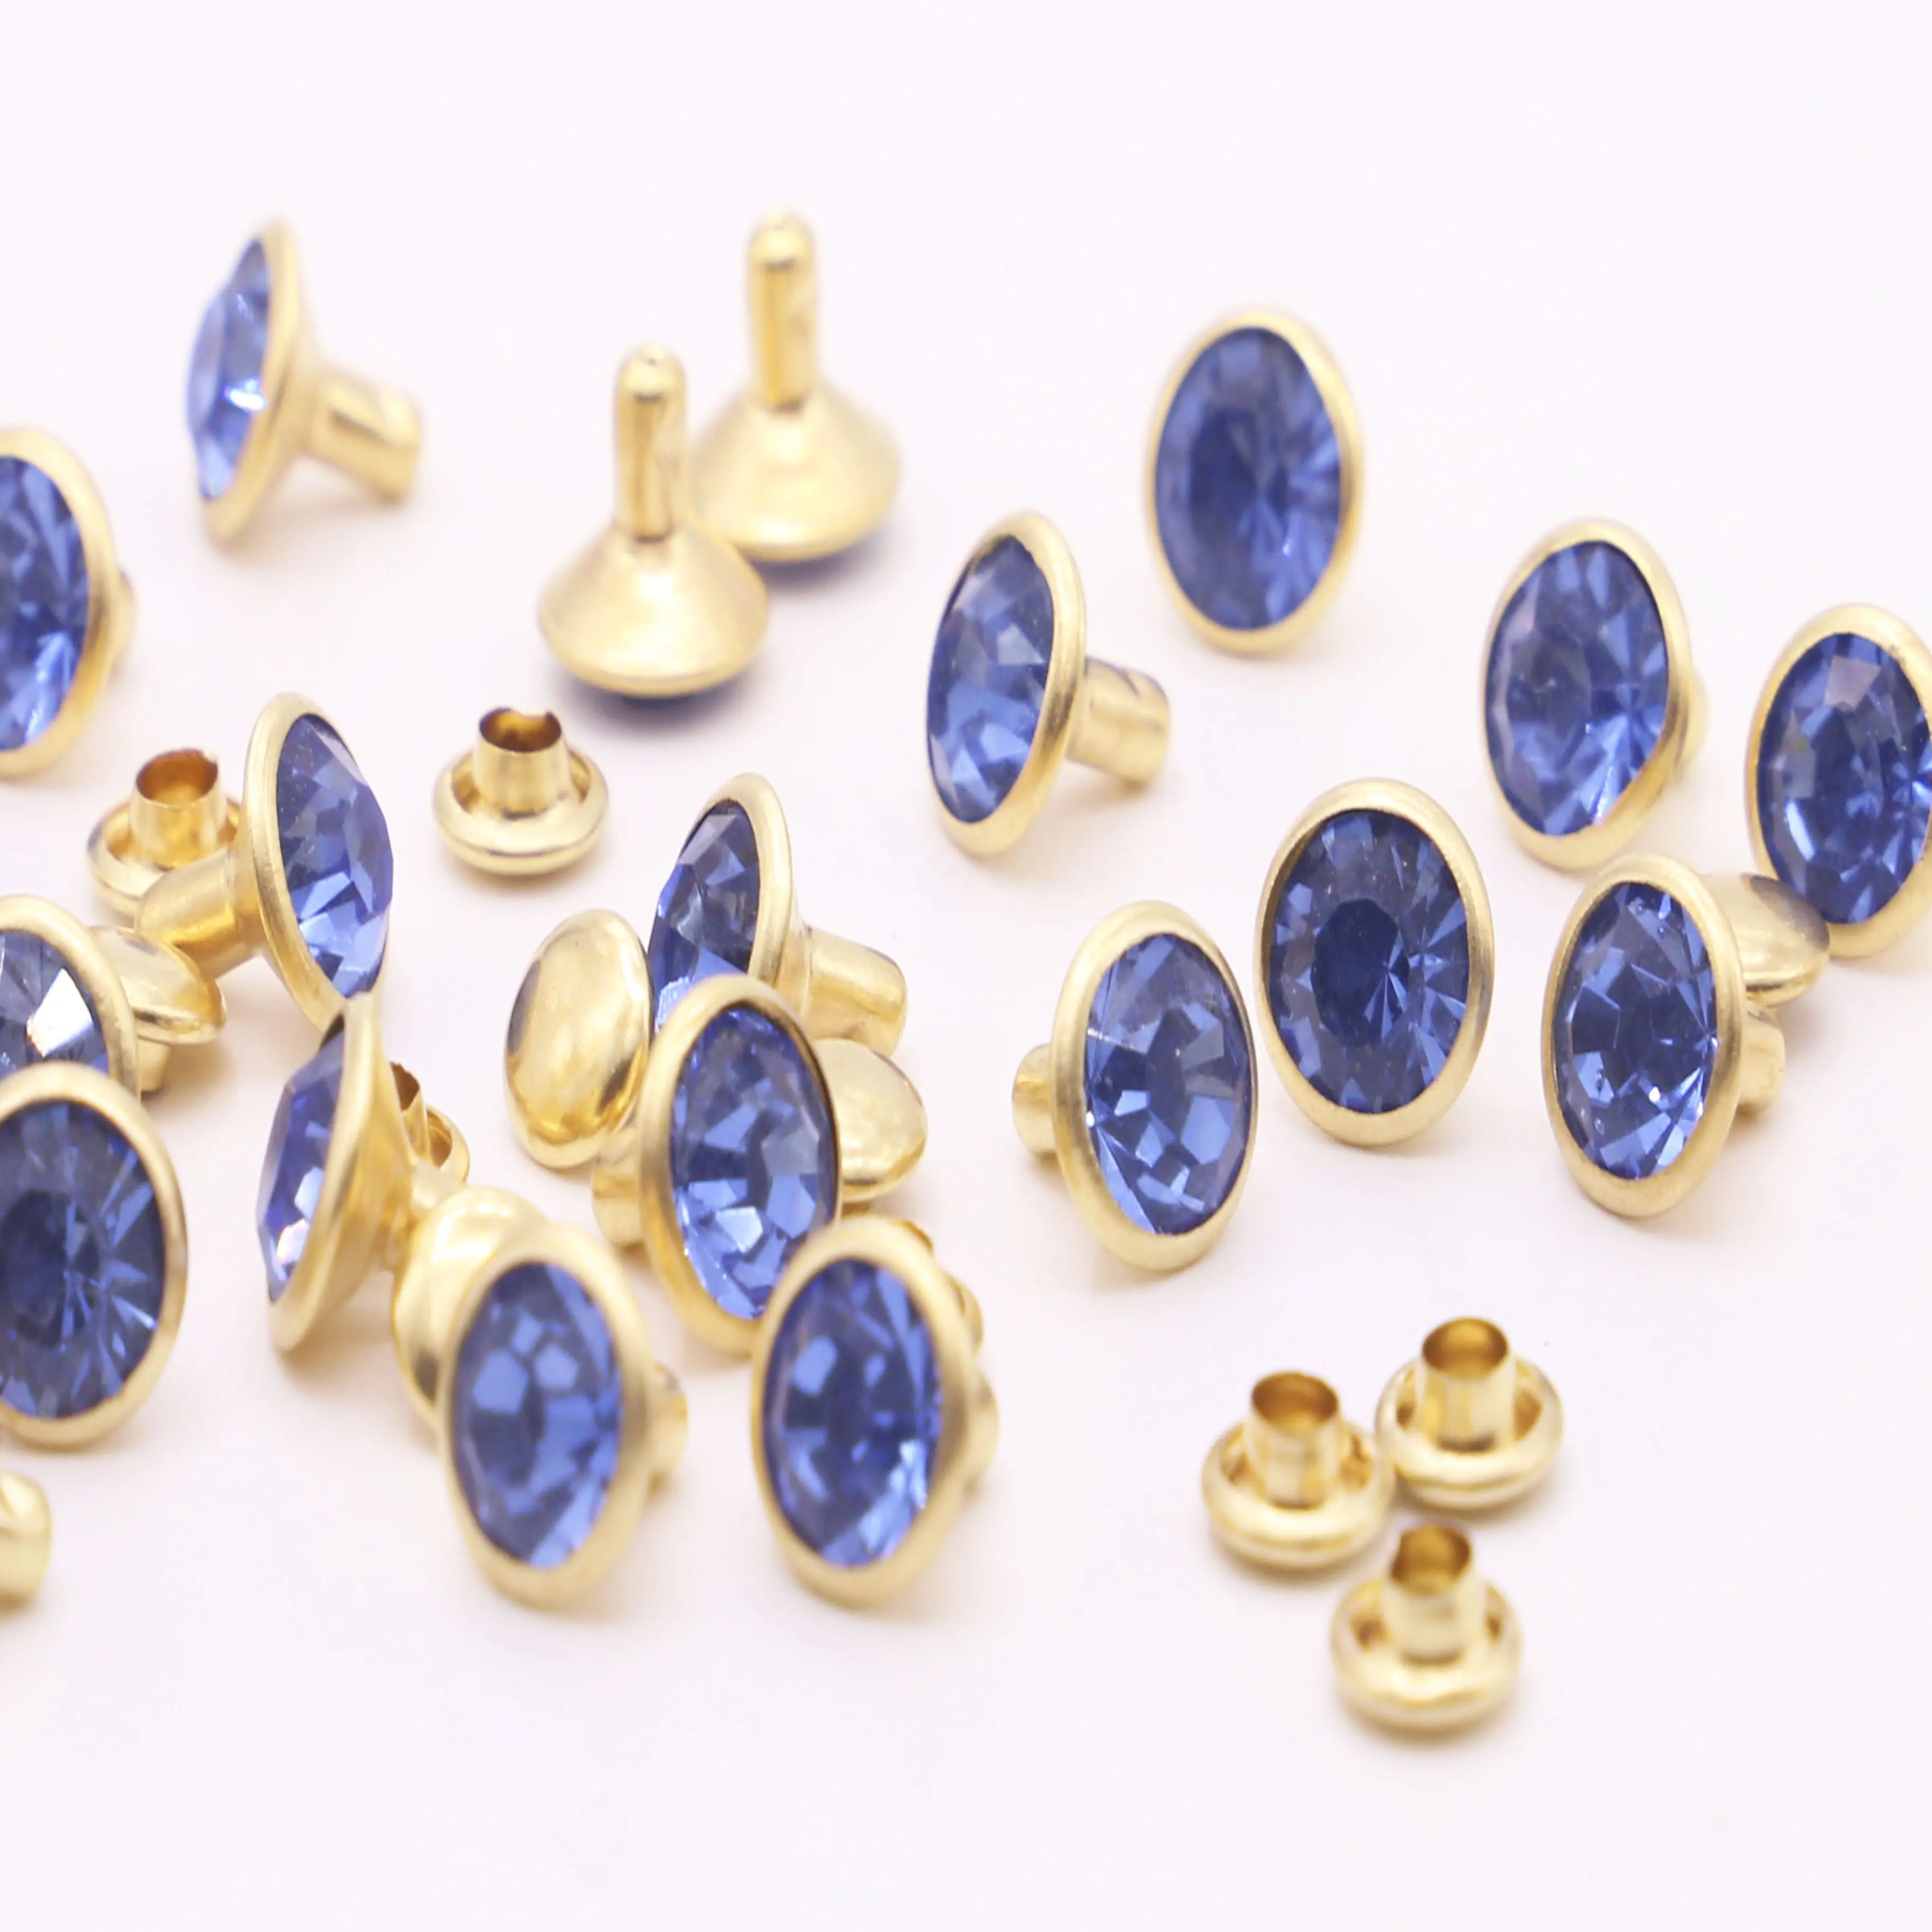 Hot-selling crystal rivets, colorful rhinestone decorative rivets, accessories and DIY handmade accessories